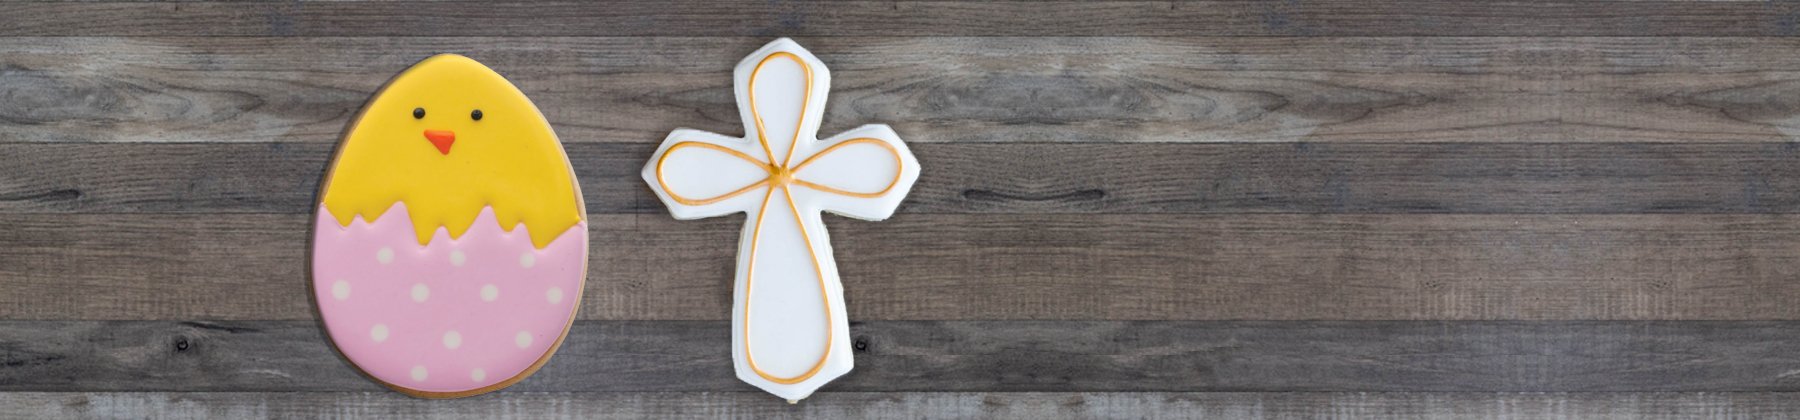 Photo of Easter egg and cross shaped cookies.